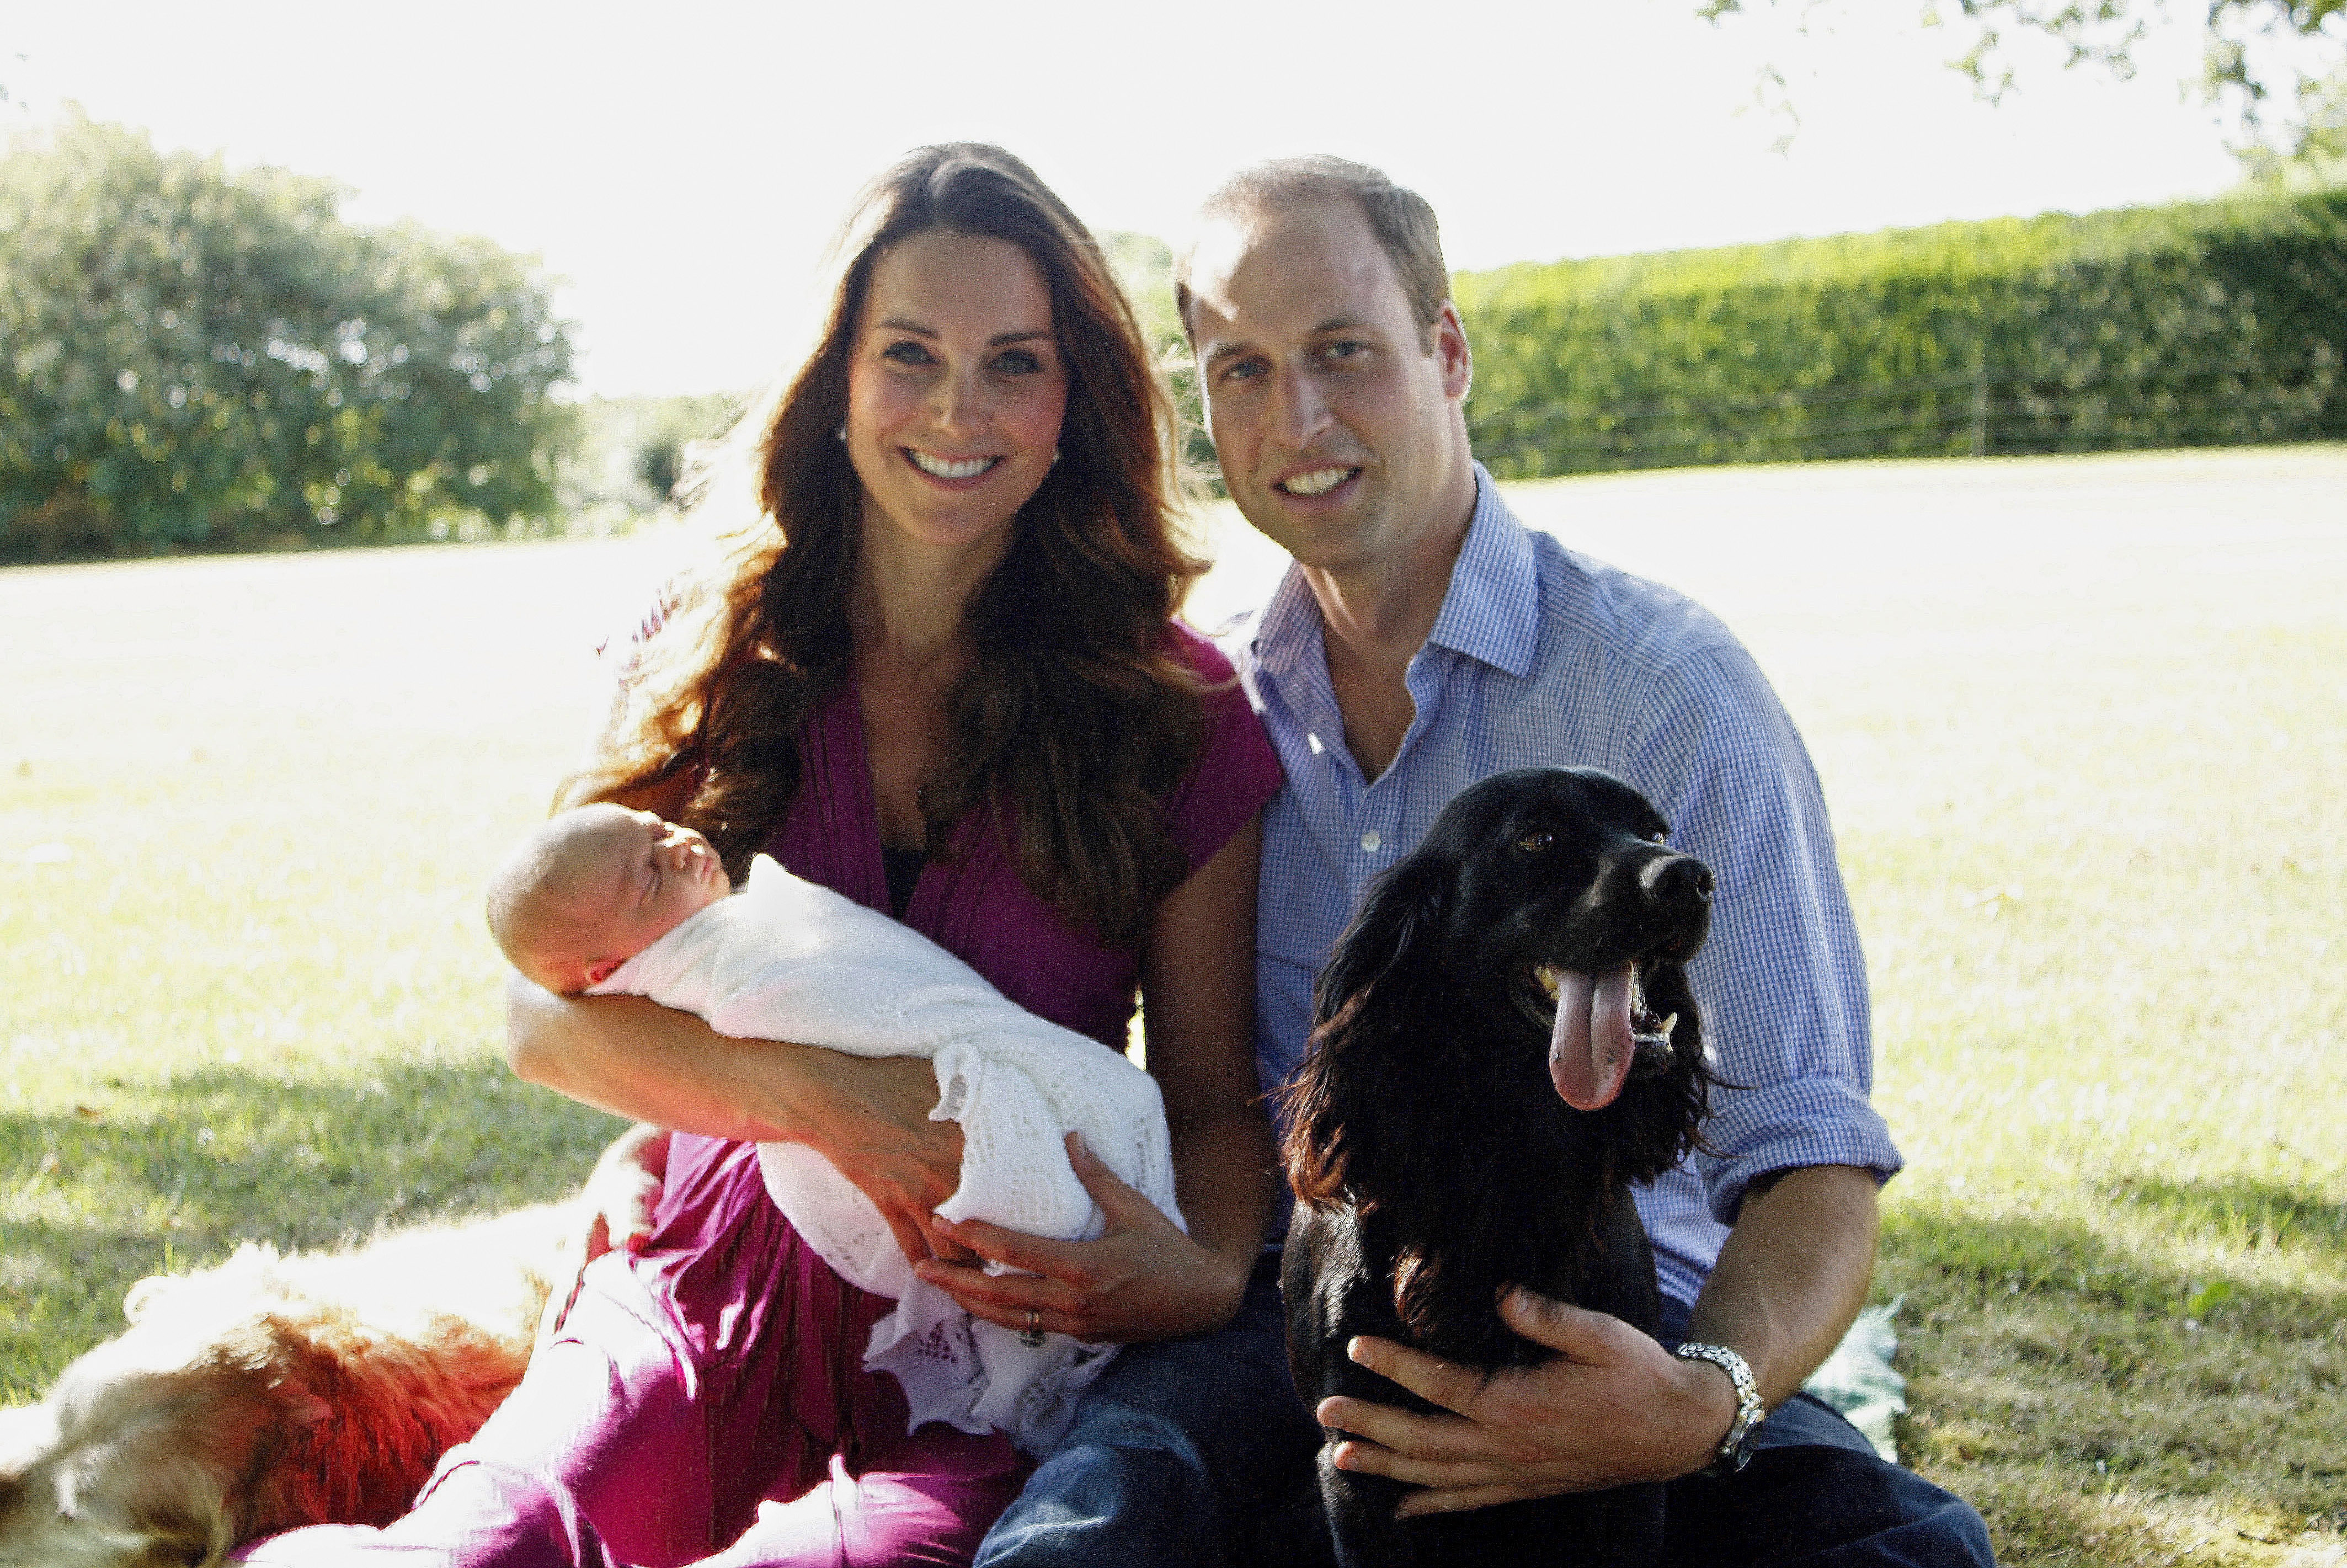 Prince George Getty Images